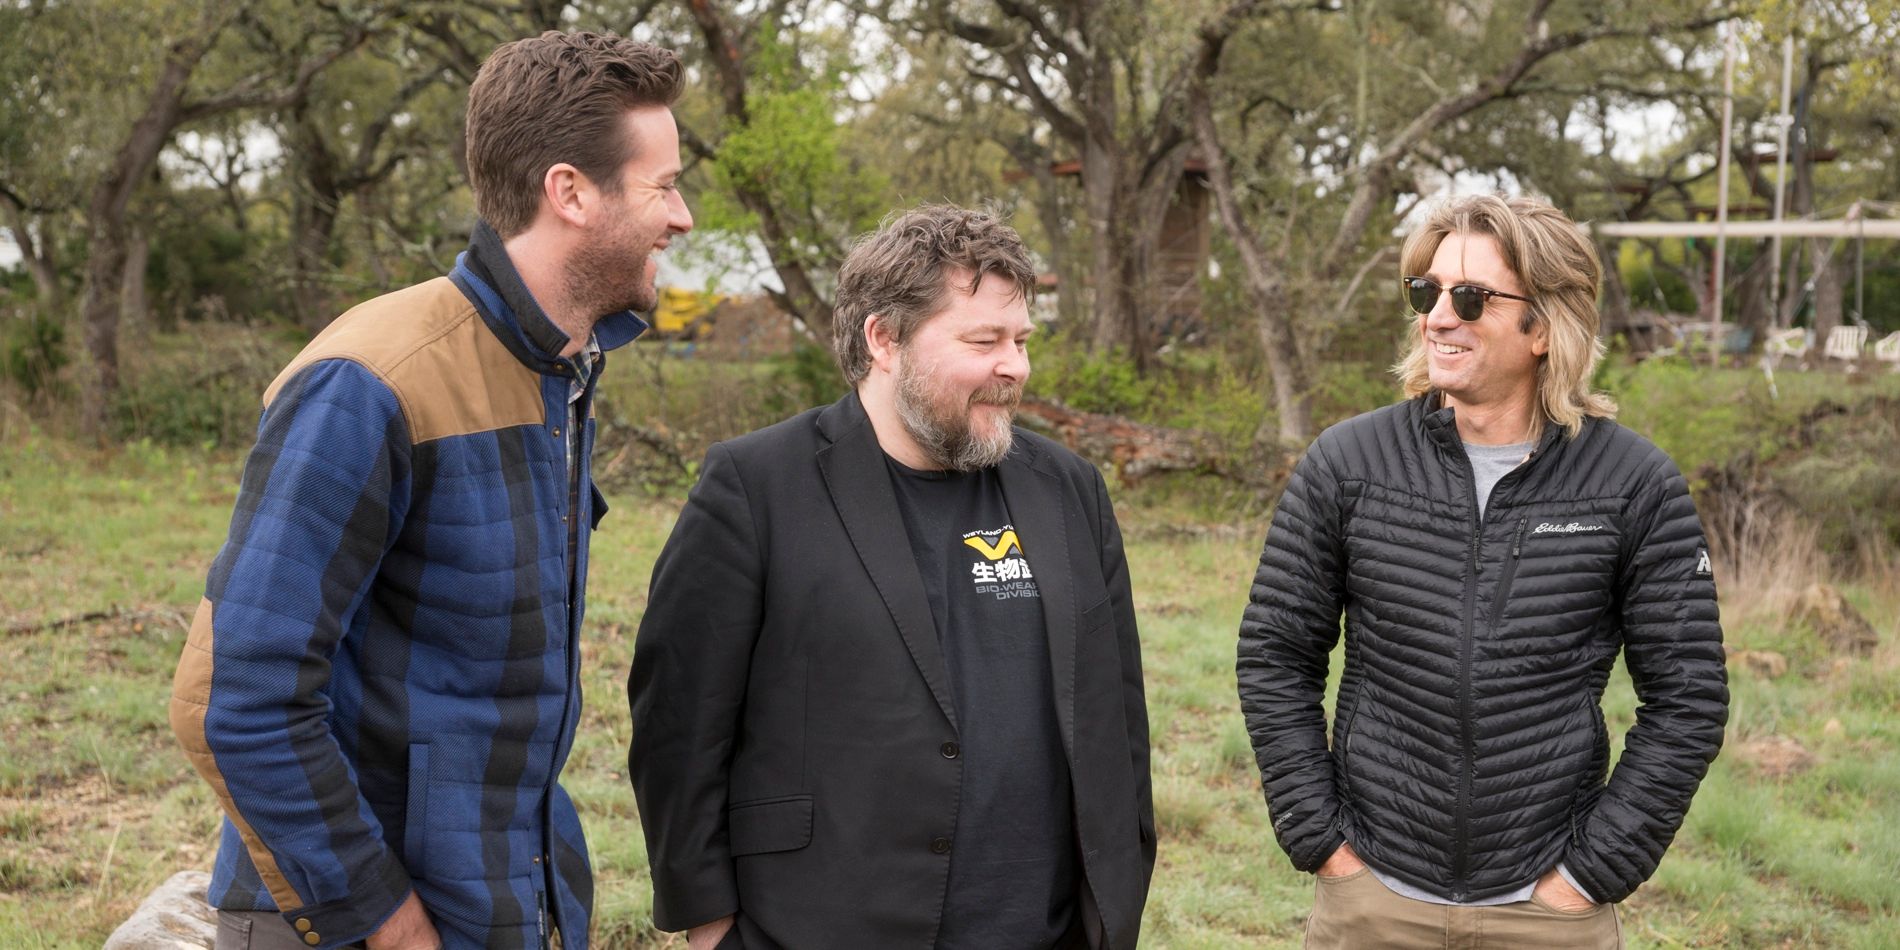 Armie Hammer, Ben Wheatley, and Sharlto Copley at SXSW